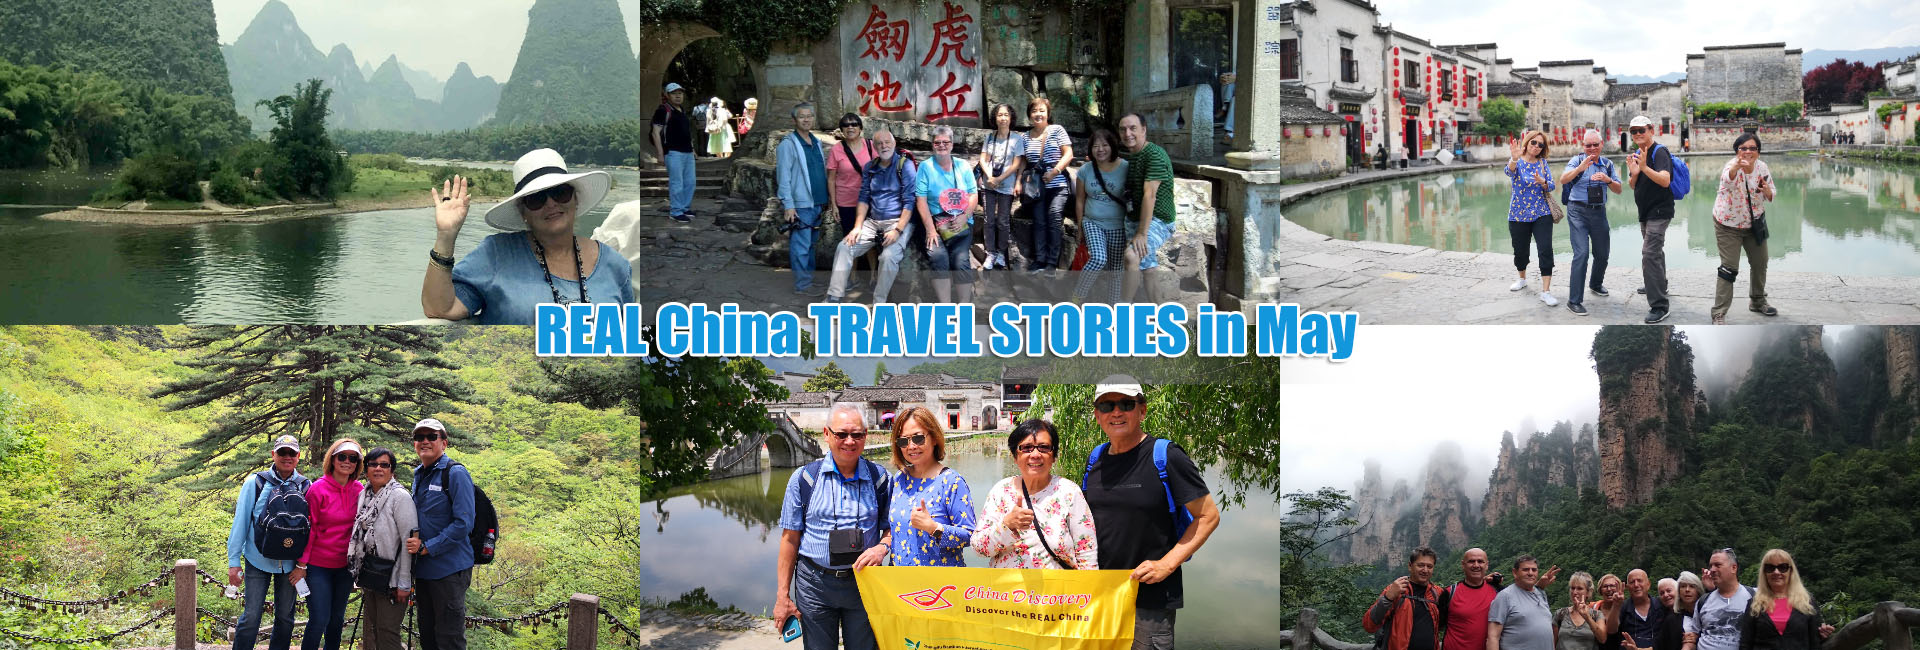 China Travel Stories in May